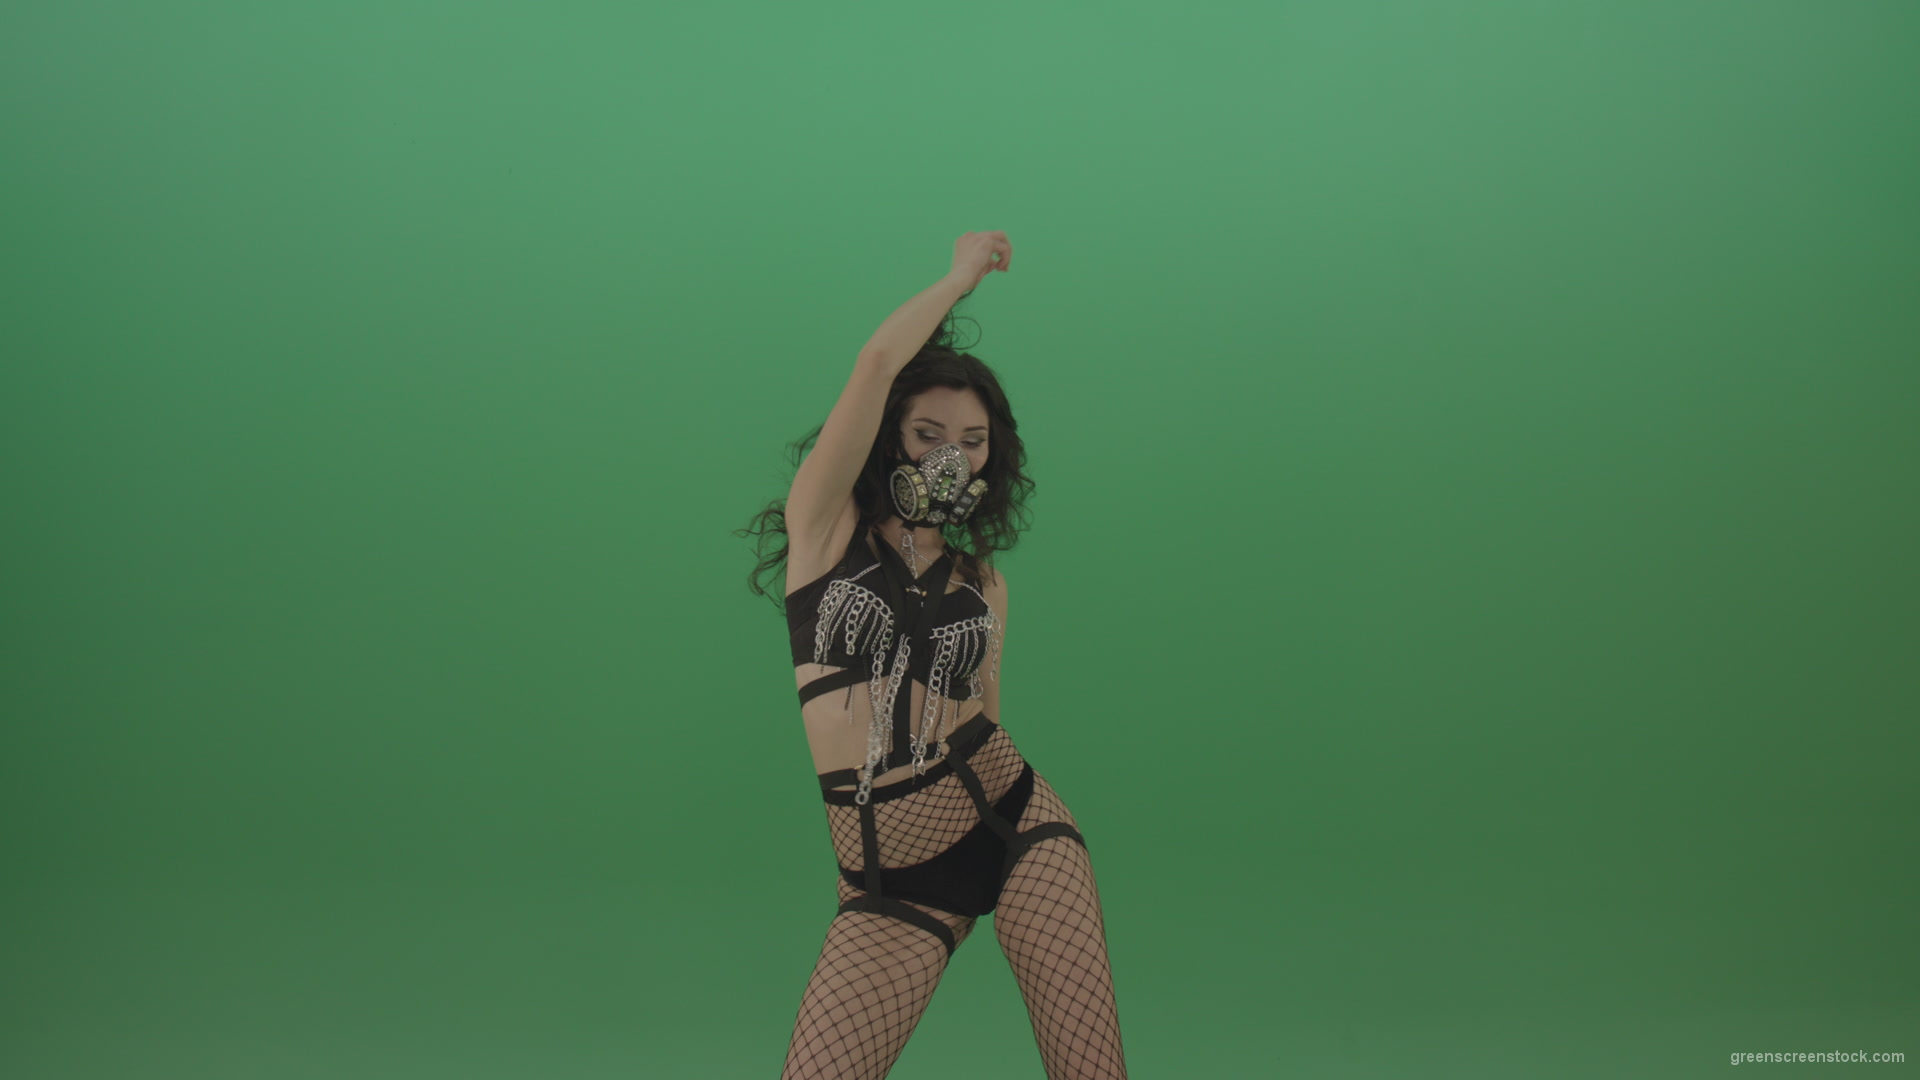 Girl-in-black-suit-and-suit-erotic-dance-on-green-background_002 Green Screen Stock